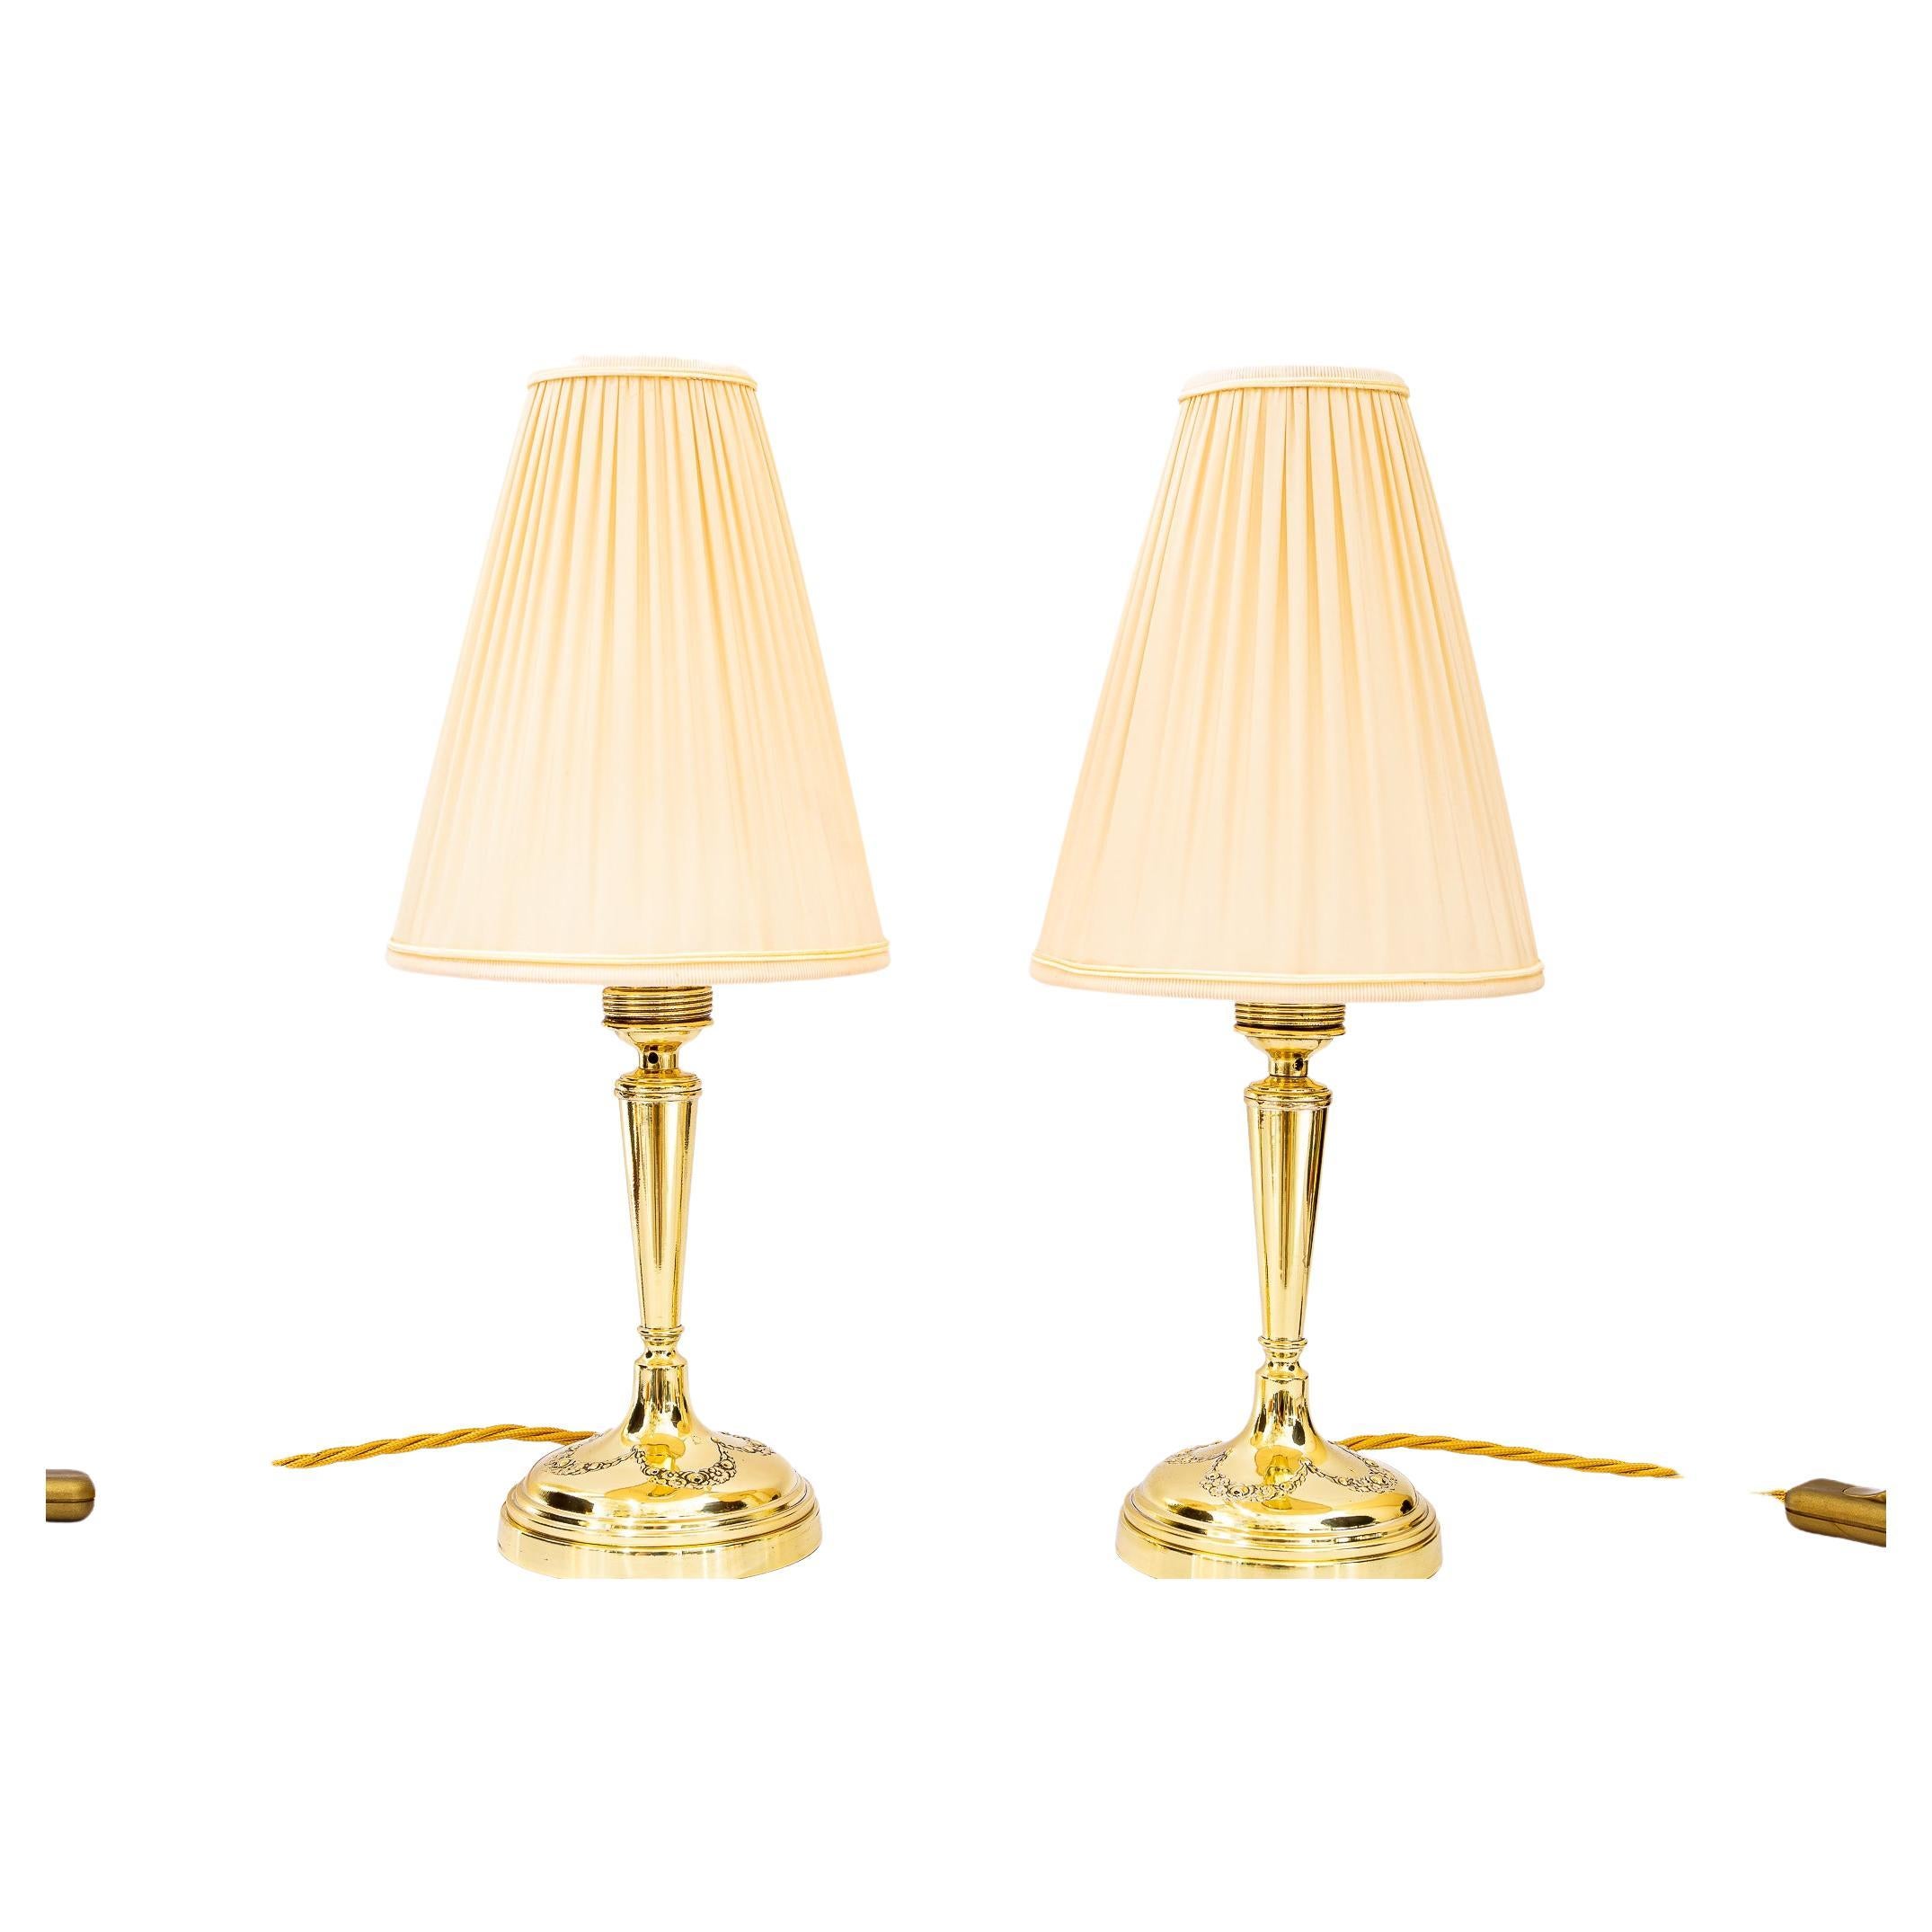 Two Art Deco Table Lamp, Vienna, Around 1920s For Sale